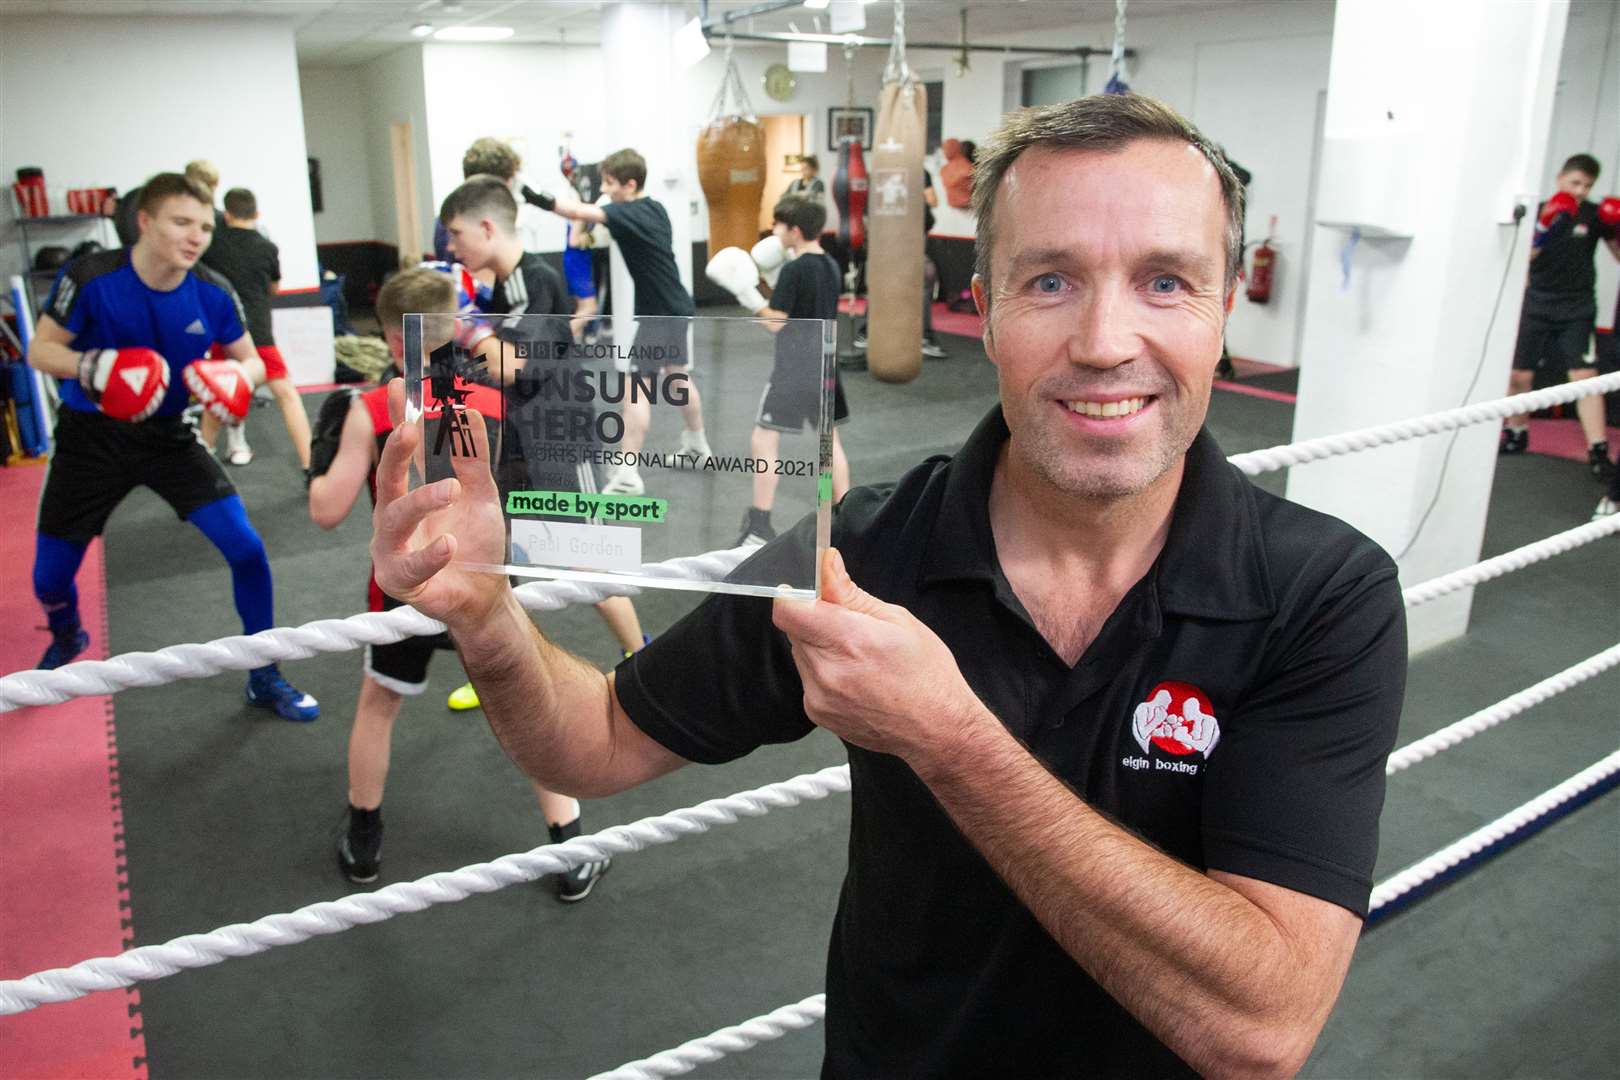 Elgin Amateur Boxing Club's head coach Paul 'Ratch' Gordon has won Scotland's Unsung Hero Award at this year's BBC Sports Personality of the Year awards...Picture: Daniel Forsyth..